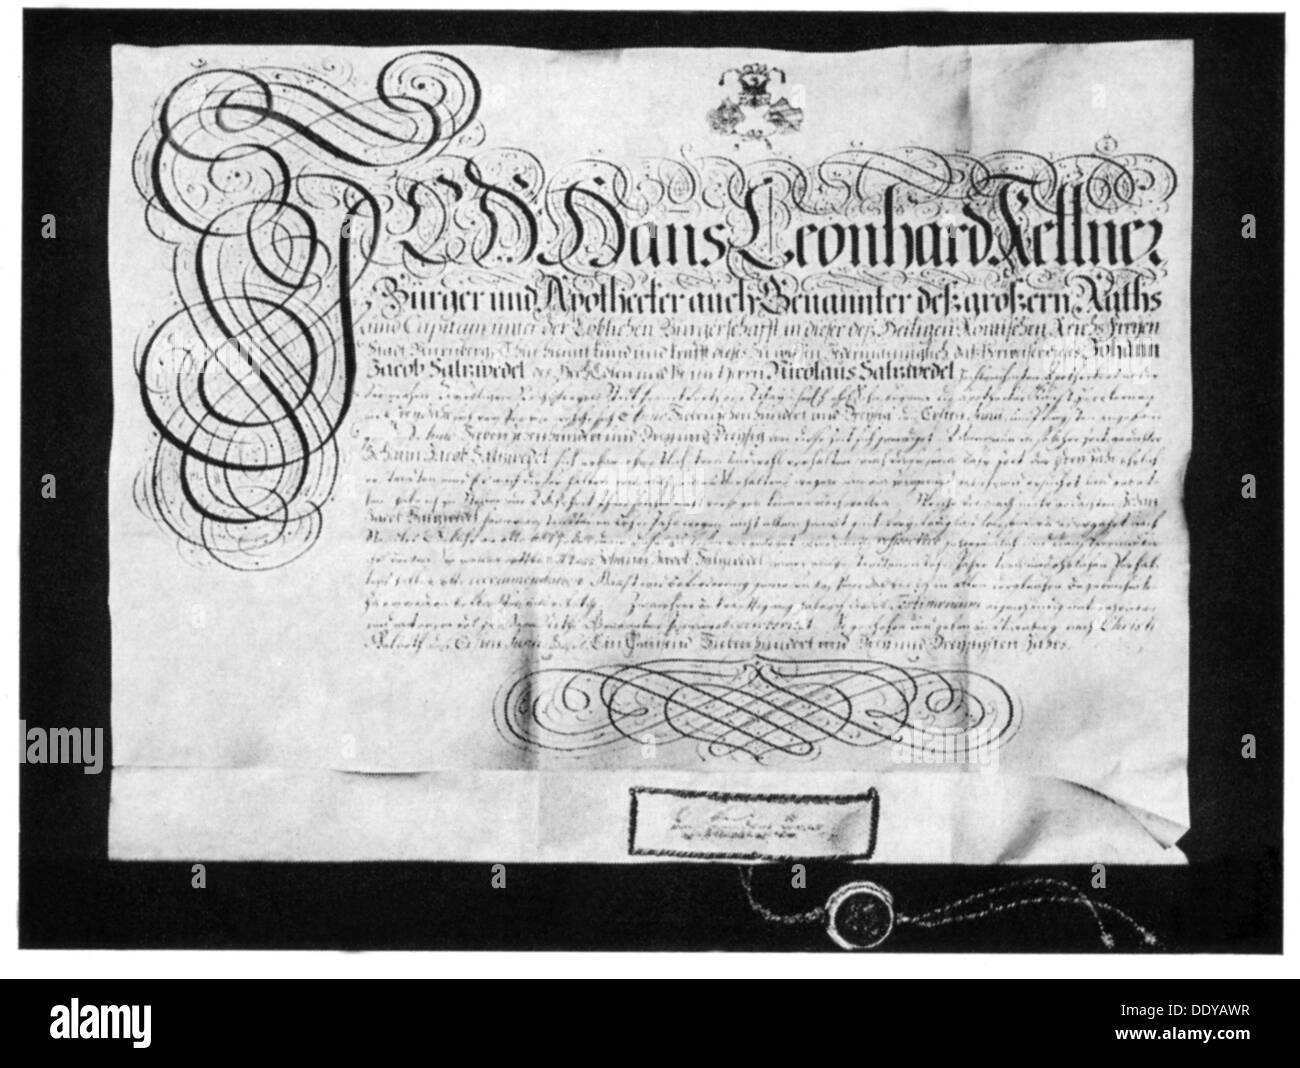 medicine, pharmacy, certificate of apprenticeship for Johann Jacob Salzwedel, Frankfurt, issued by apothecary Hans Leonhard Kellner, Nuremberg, 1.7.1733, Additional-Rights-Clearences-Not Available Stock Photo